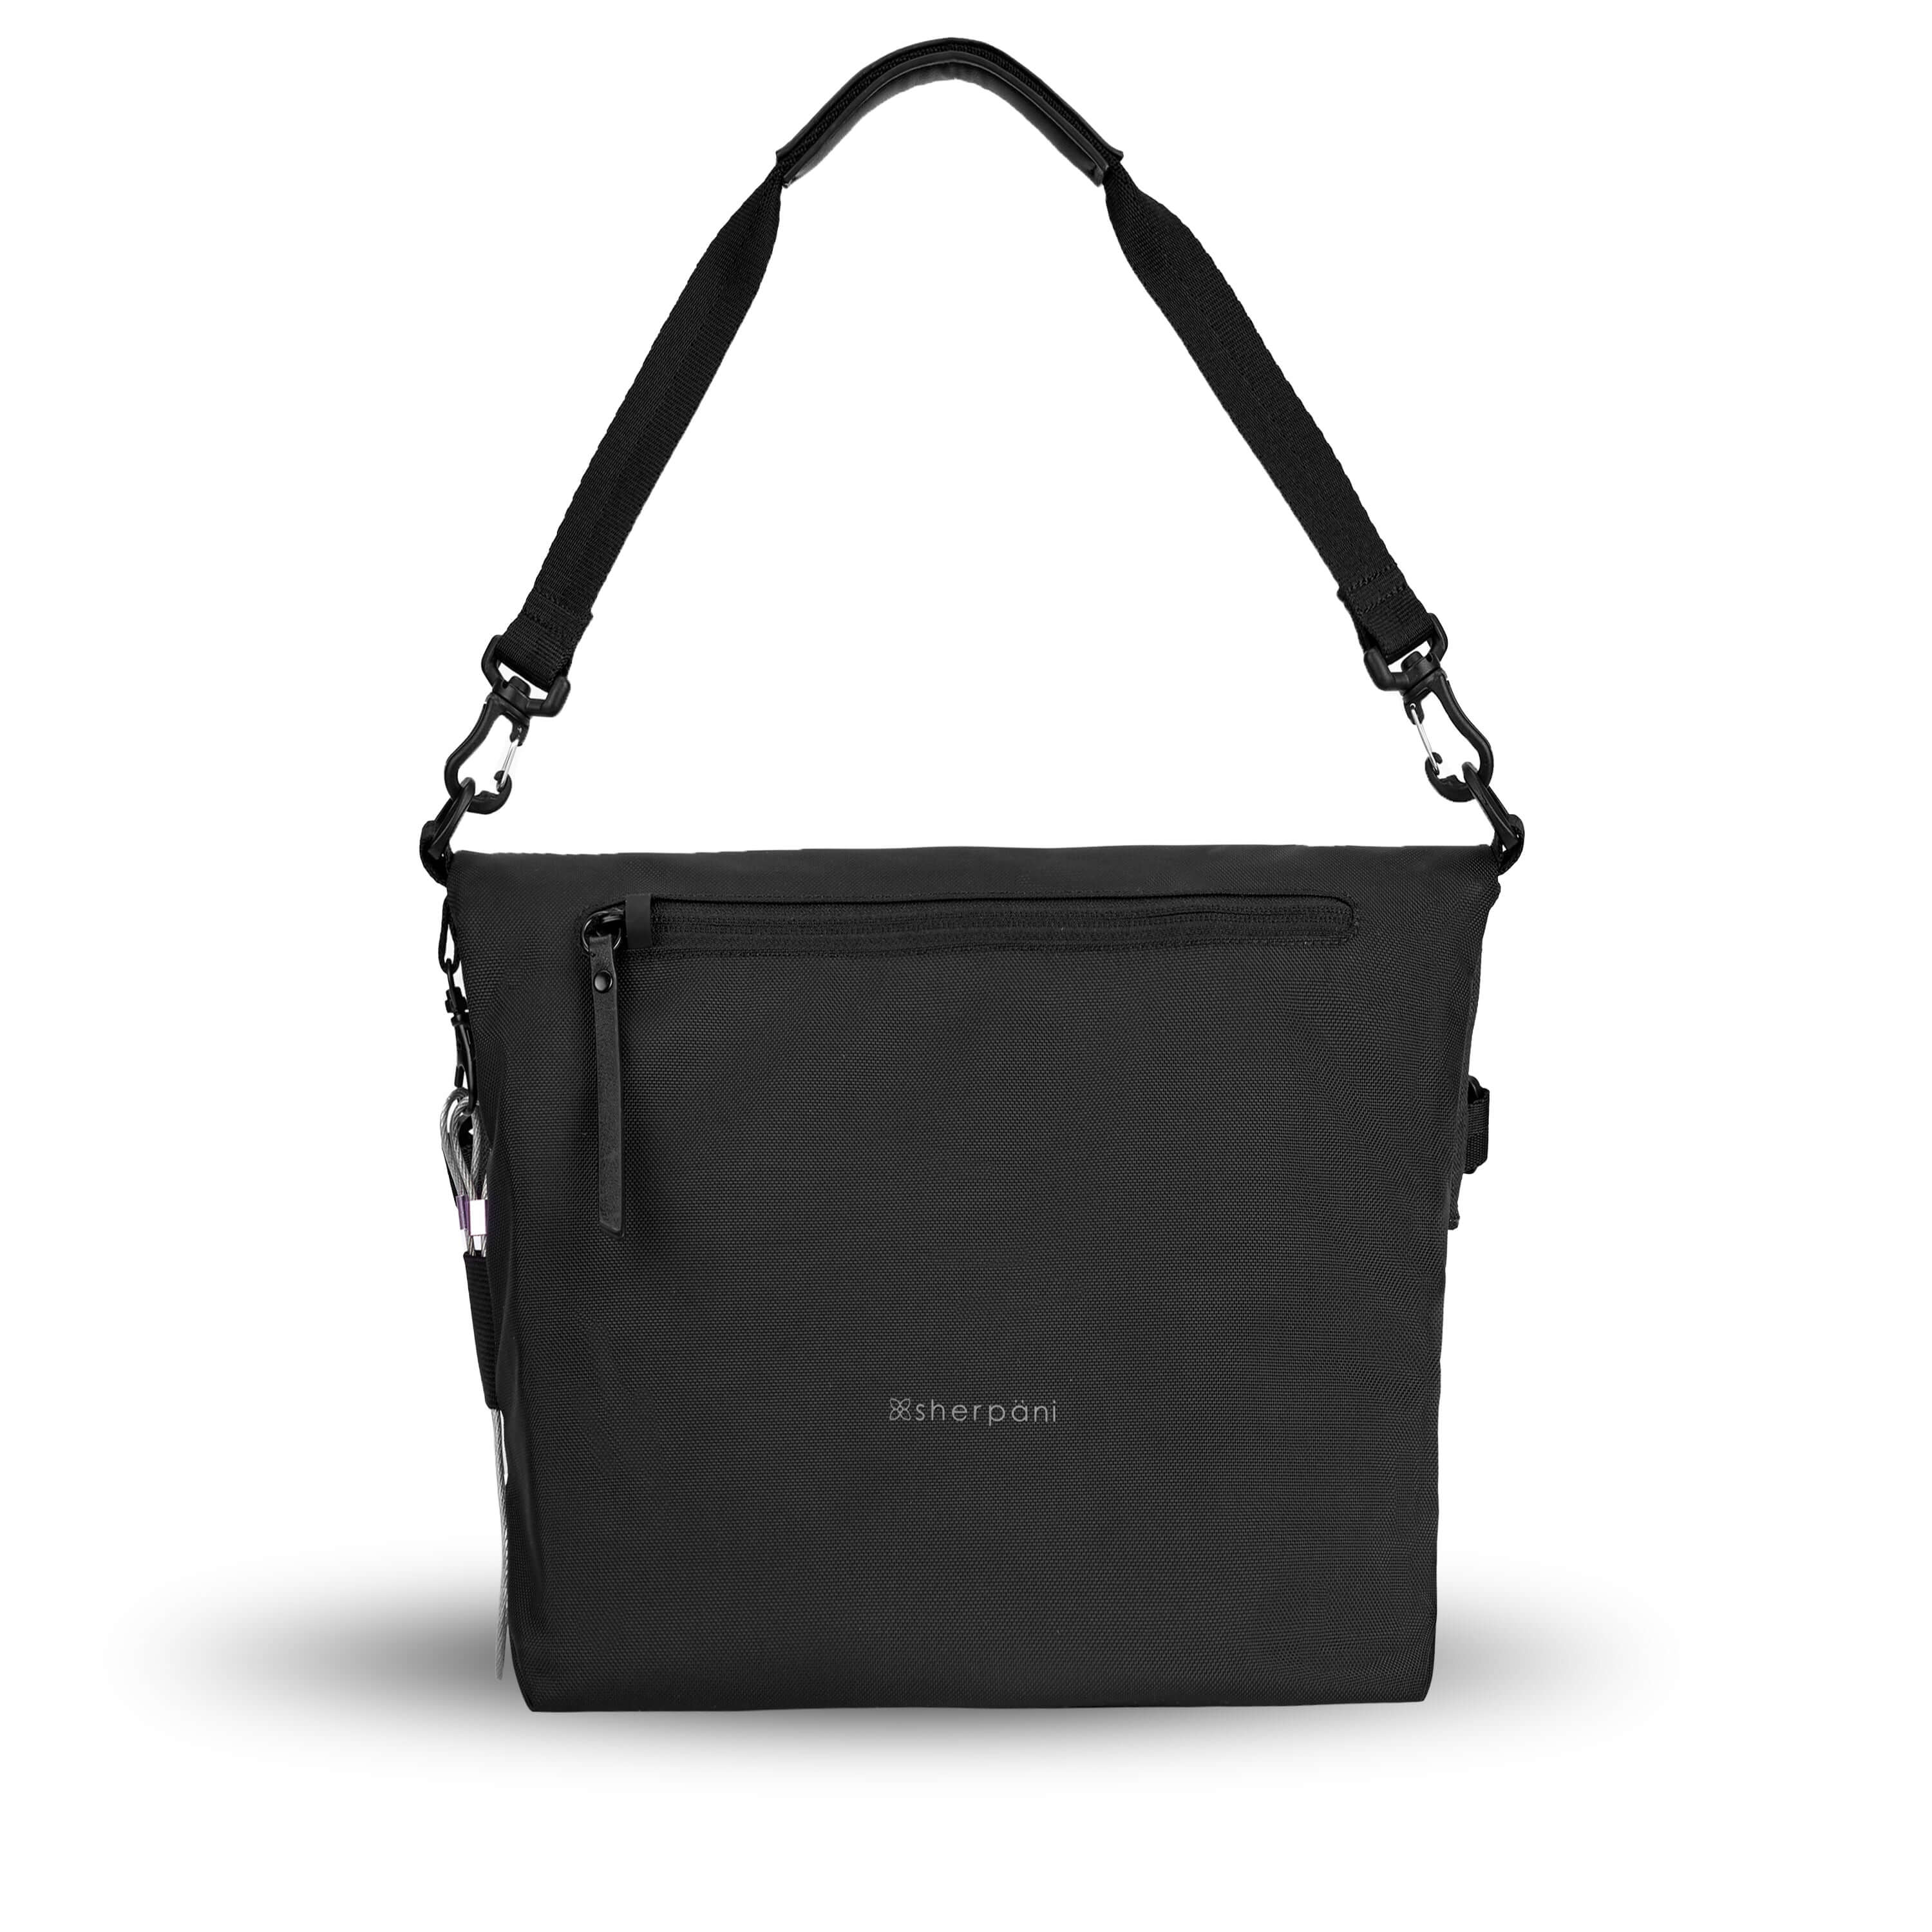 Flat view of the back of Sherpani’s Anti-Theft bag, the Vale AT. The back is entirely black, and has vegan leather accents in black. There is an external pocket with a locking zipper, a chair loop lock on one side, and a detachable short tote handle clipped onto the bag. 